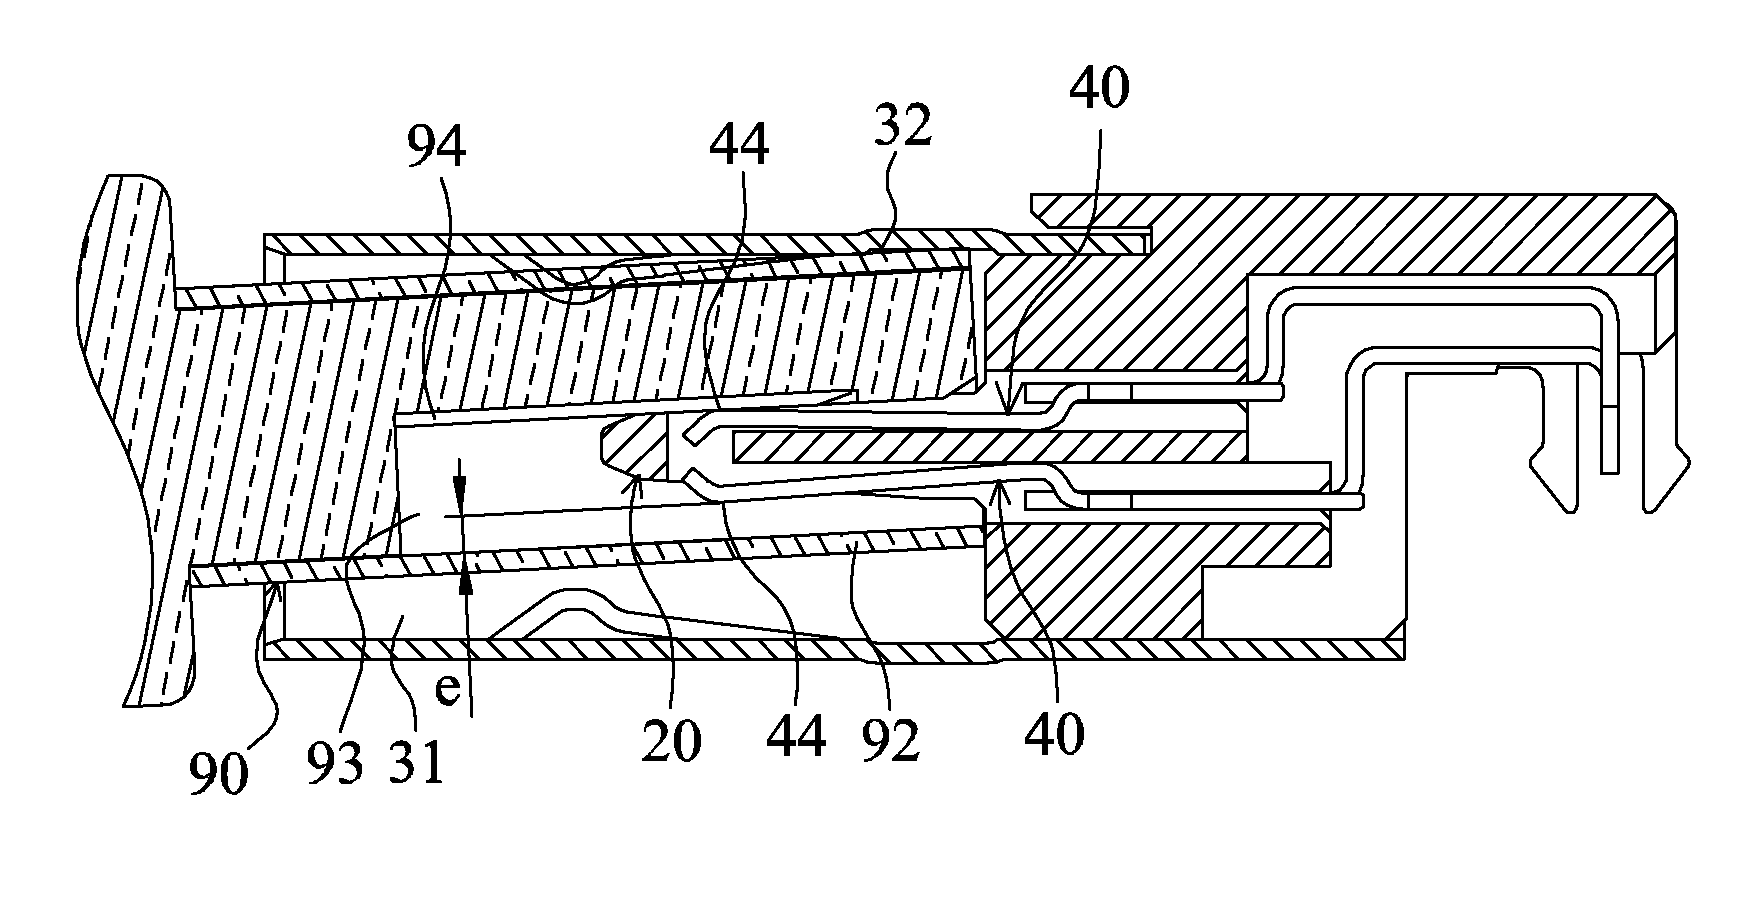 Electrical connector for bidirectional plug insertion